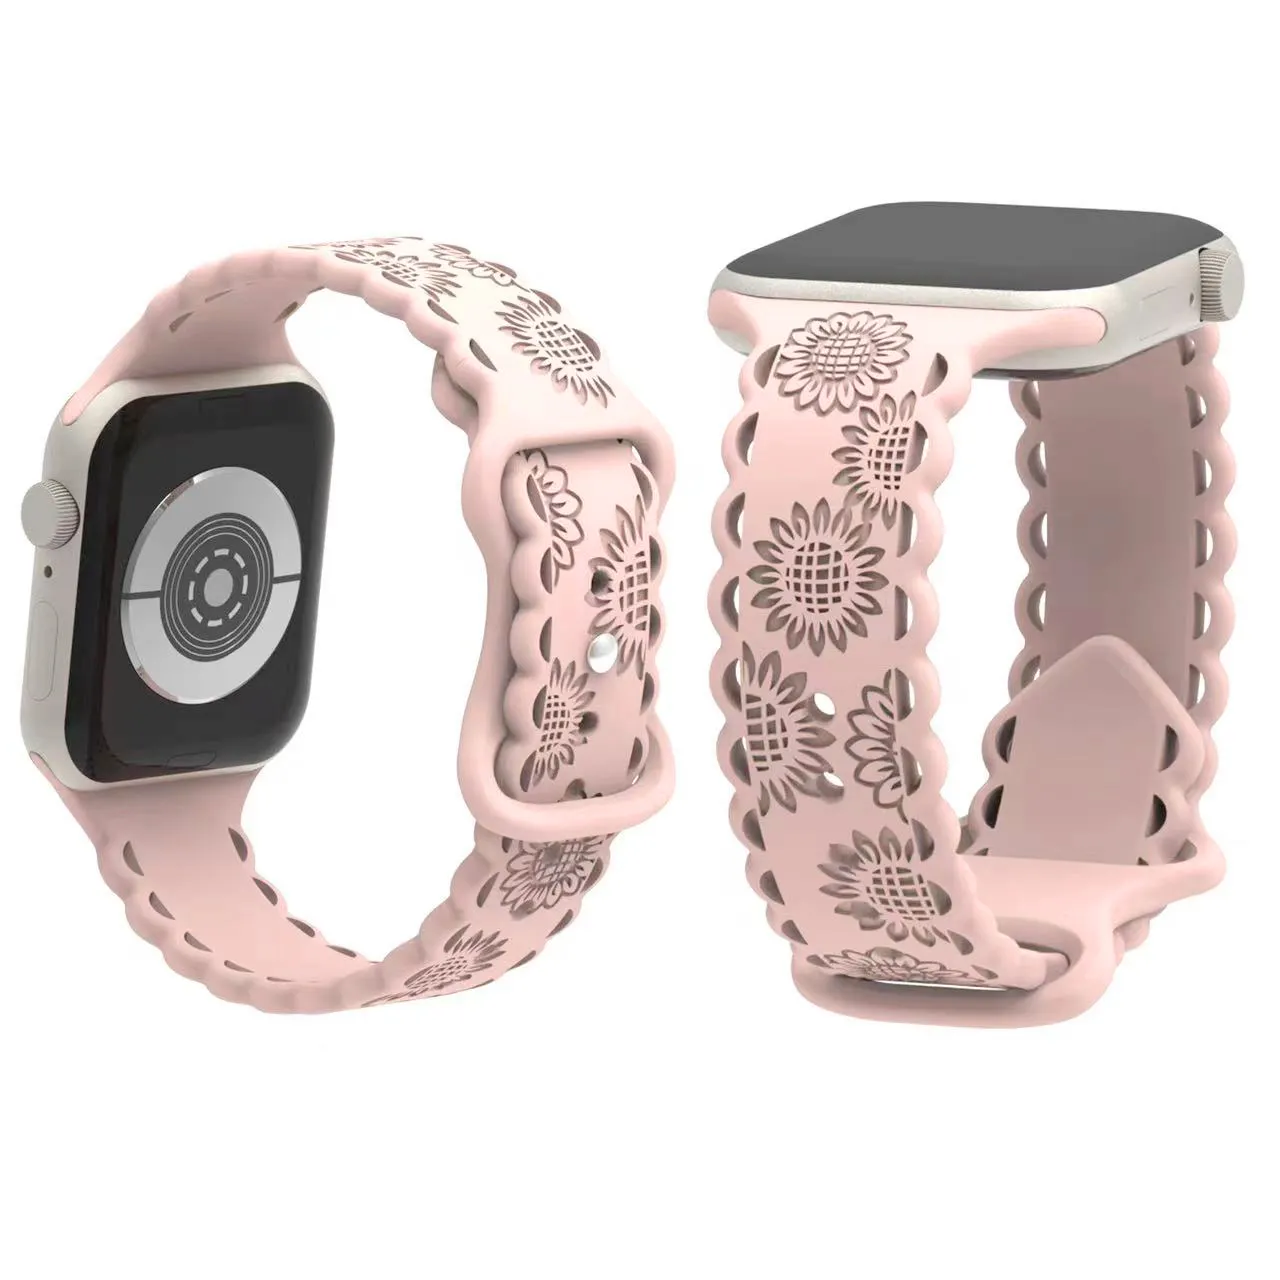 New Design Hollowed Sunflower Lacework Floral Rubber Sport Silicone Watch Bracelet IWatch Band Straps For Smart Watch